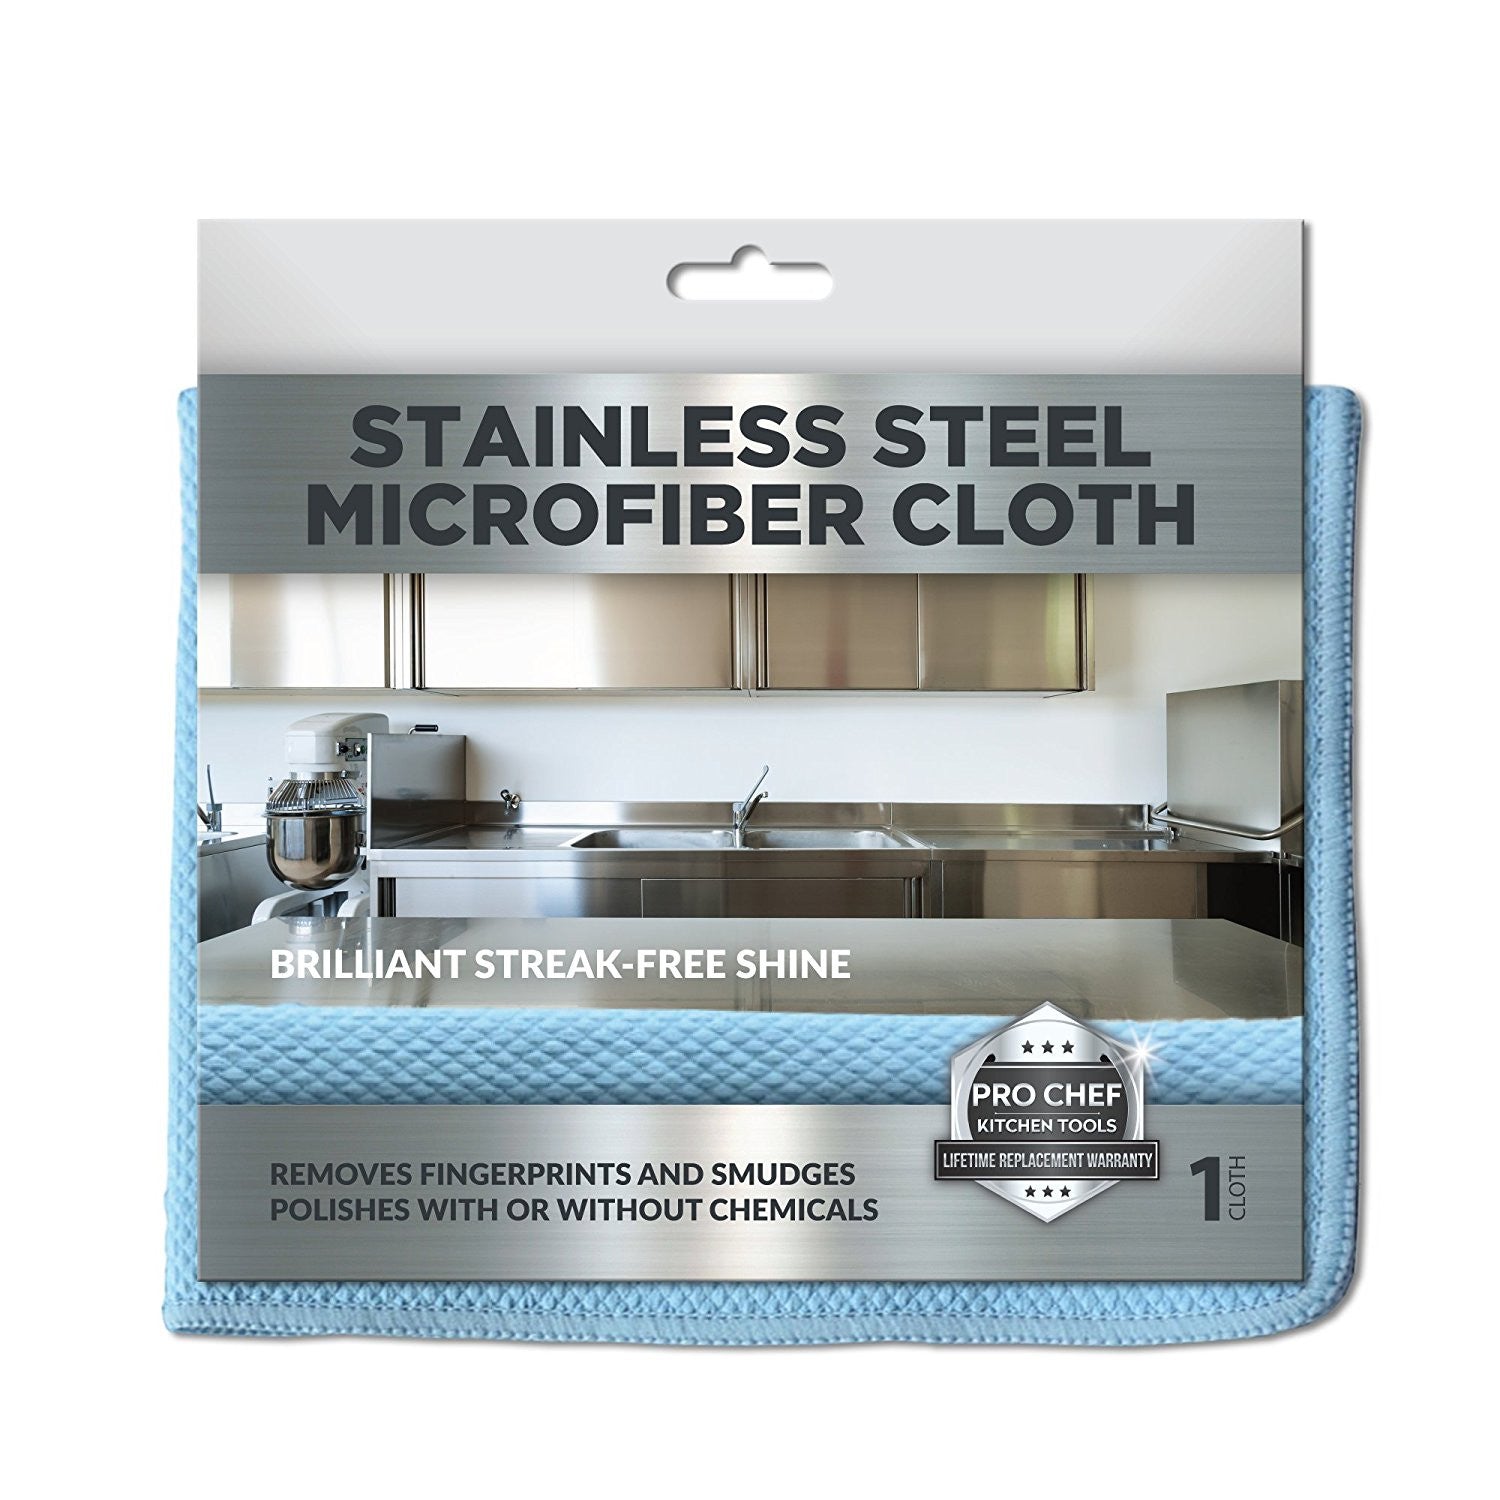 Stainless steel cloth